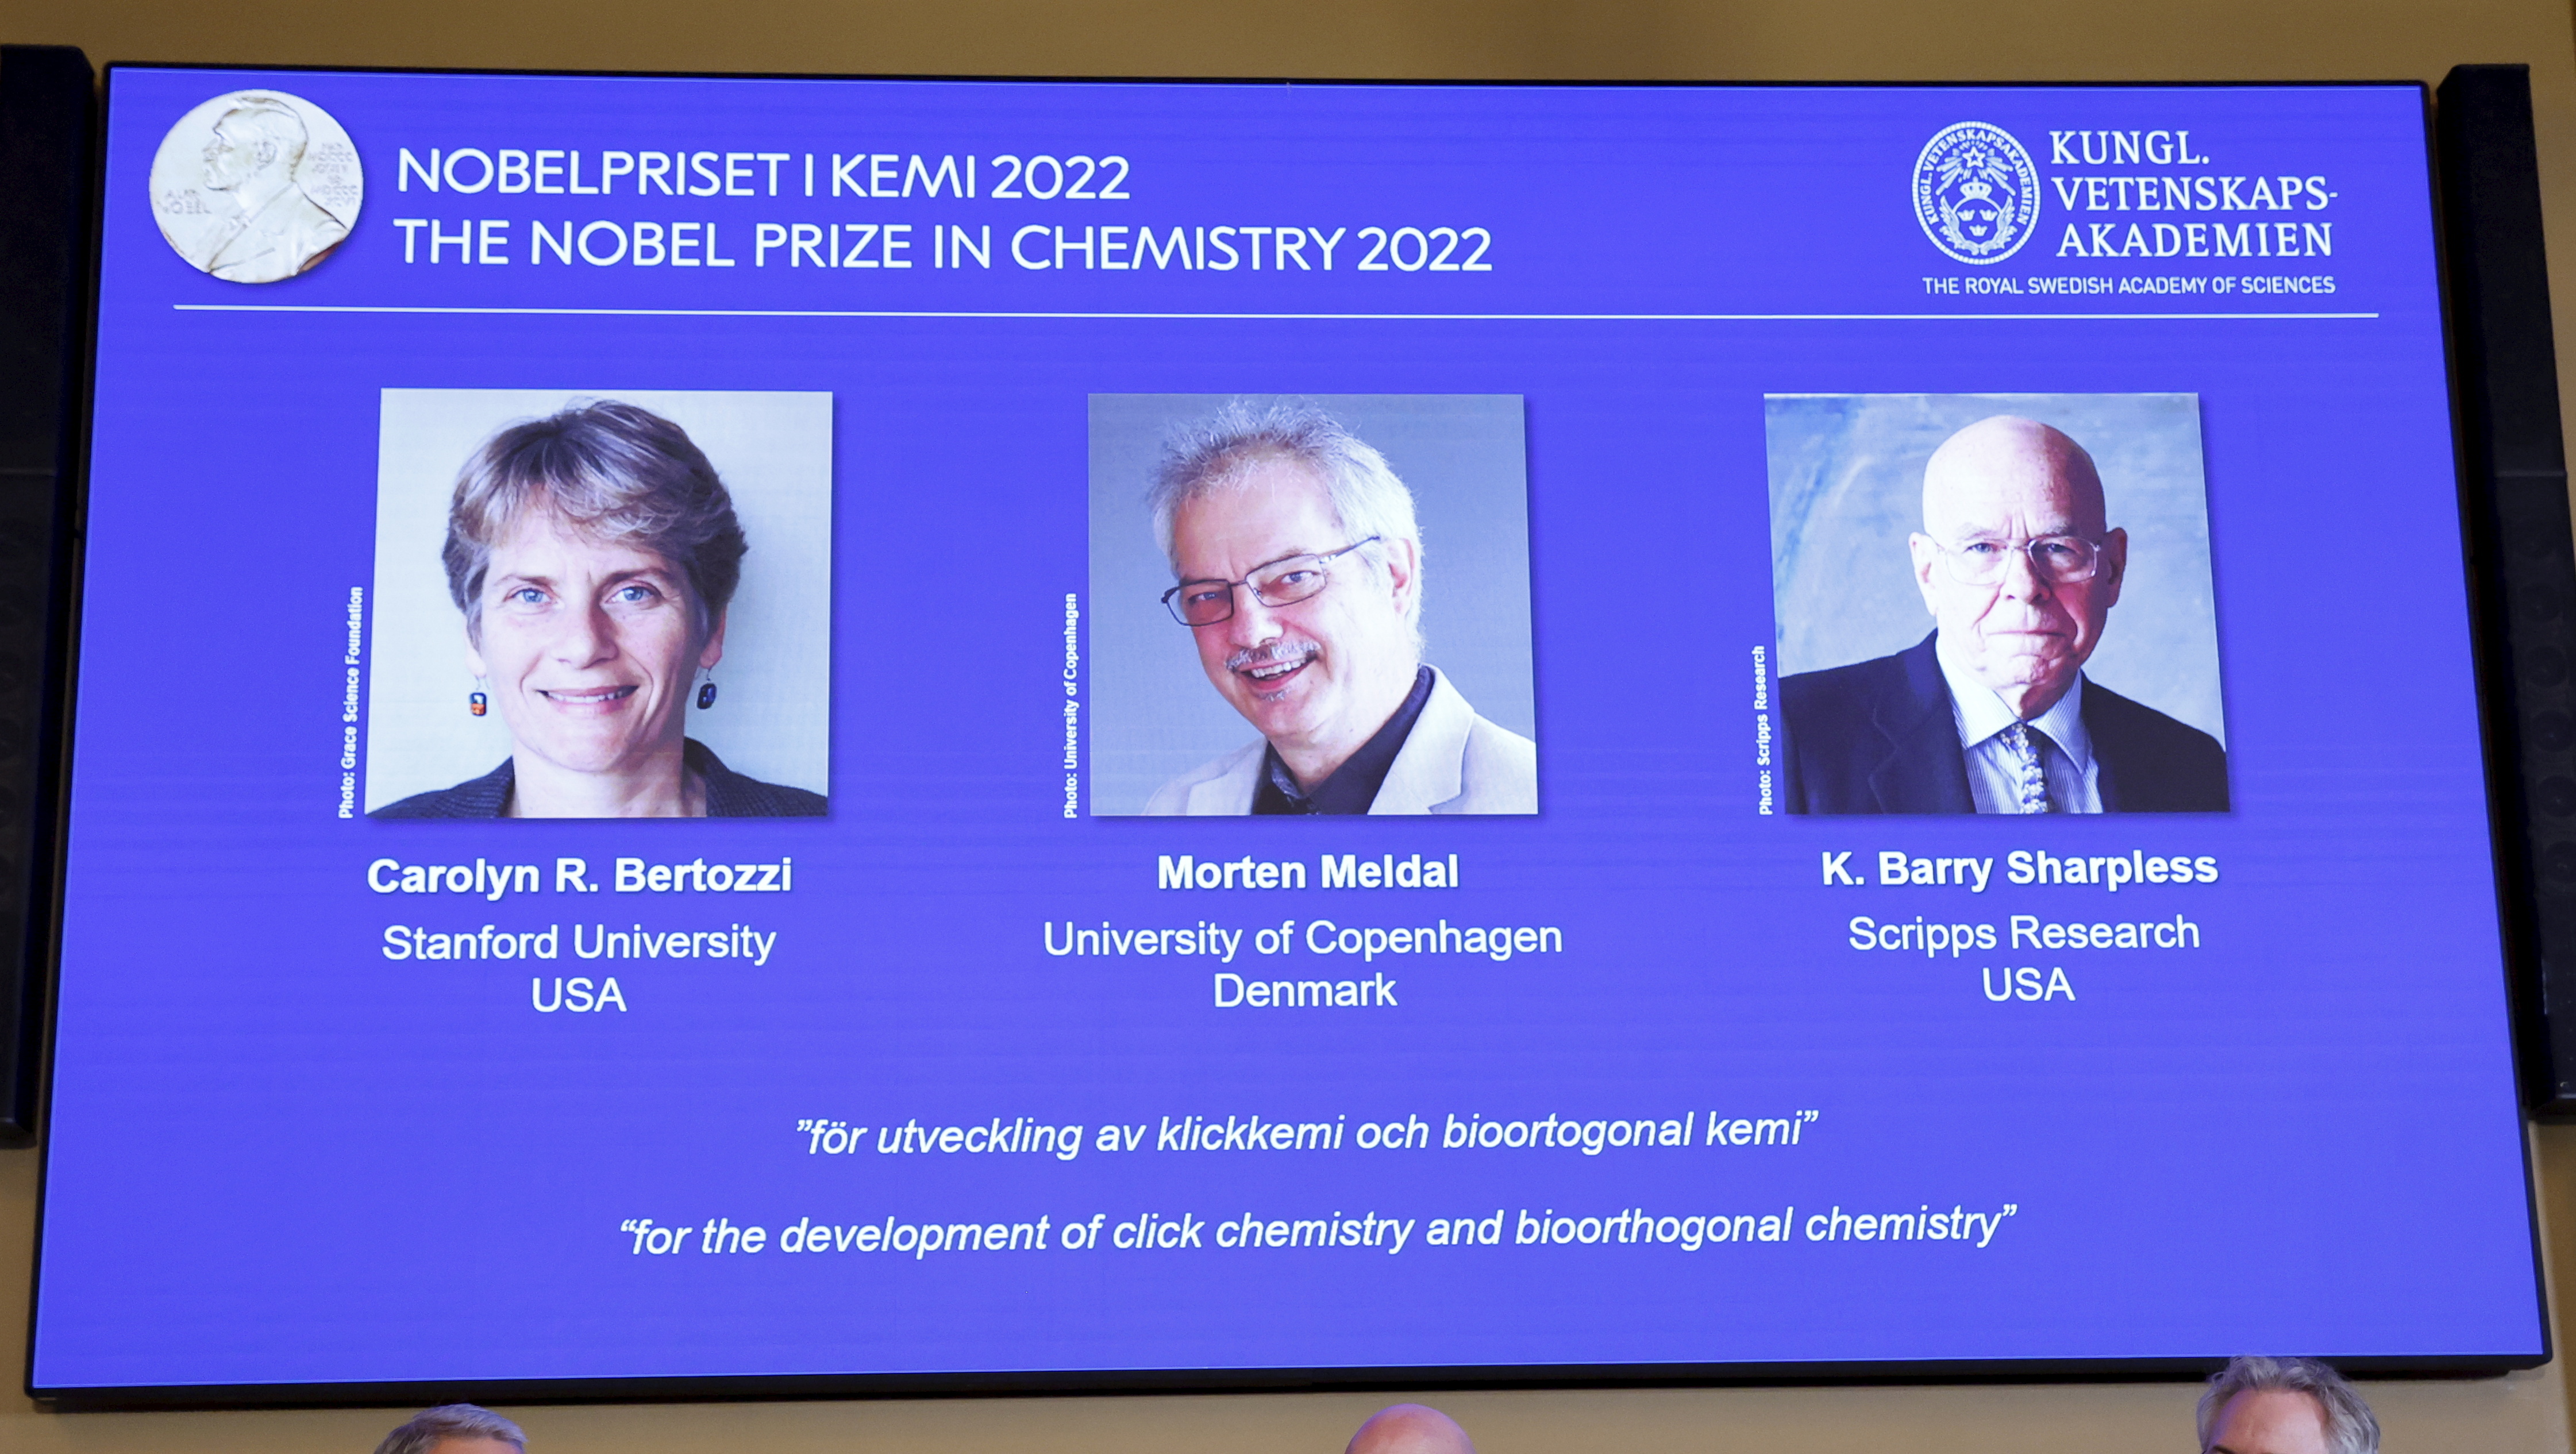 The three winners of the Nobel Prize for chemistry are shown at a press conference at The Royal Swedish Academy of Sciences in Stockholm, Sweden, Wednesday, Oct. 5, 2022. The winners of the 2022 Nobel Prize in chemistry are Caroline R. Bertozzi, USA, Morten Meldal, Denmark and K. Barry Sharpless, USA. (Christine Olsson/TT News Agency via AP)